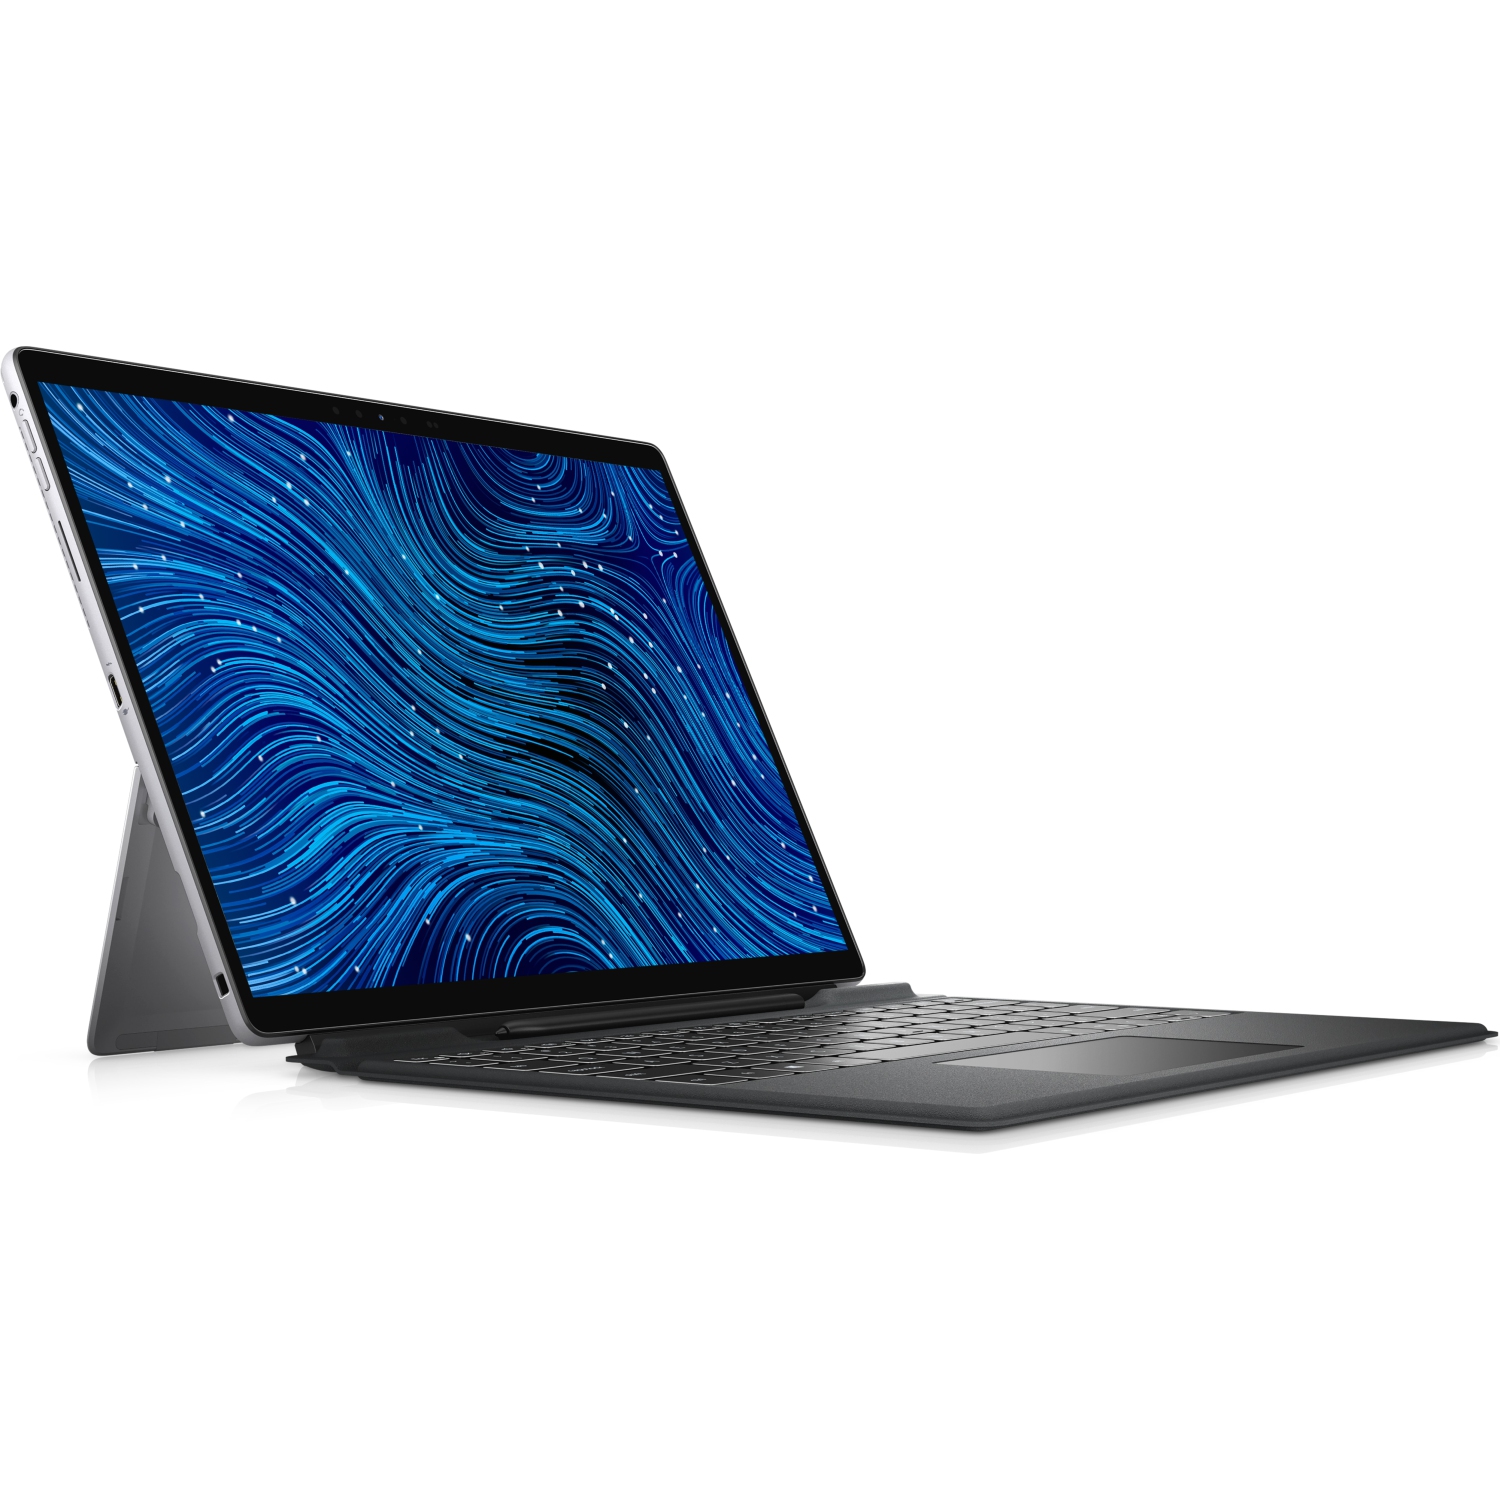 Refurbished (Excellent) - Dell Latitude 7000 7320 Detachable 13 2-in-1 (2021), 13" FHD+ Touch, Core i7, 256GB SSD, 16GB RAM, 4 Cores @ 4.6 GHz, 11th Gen CPU Certified